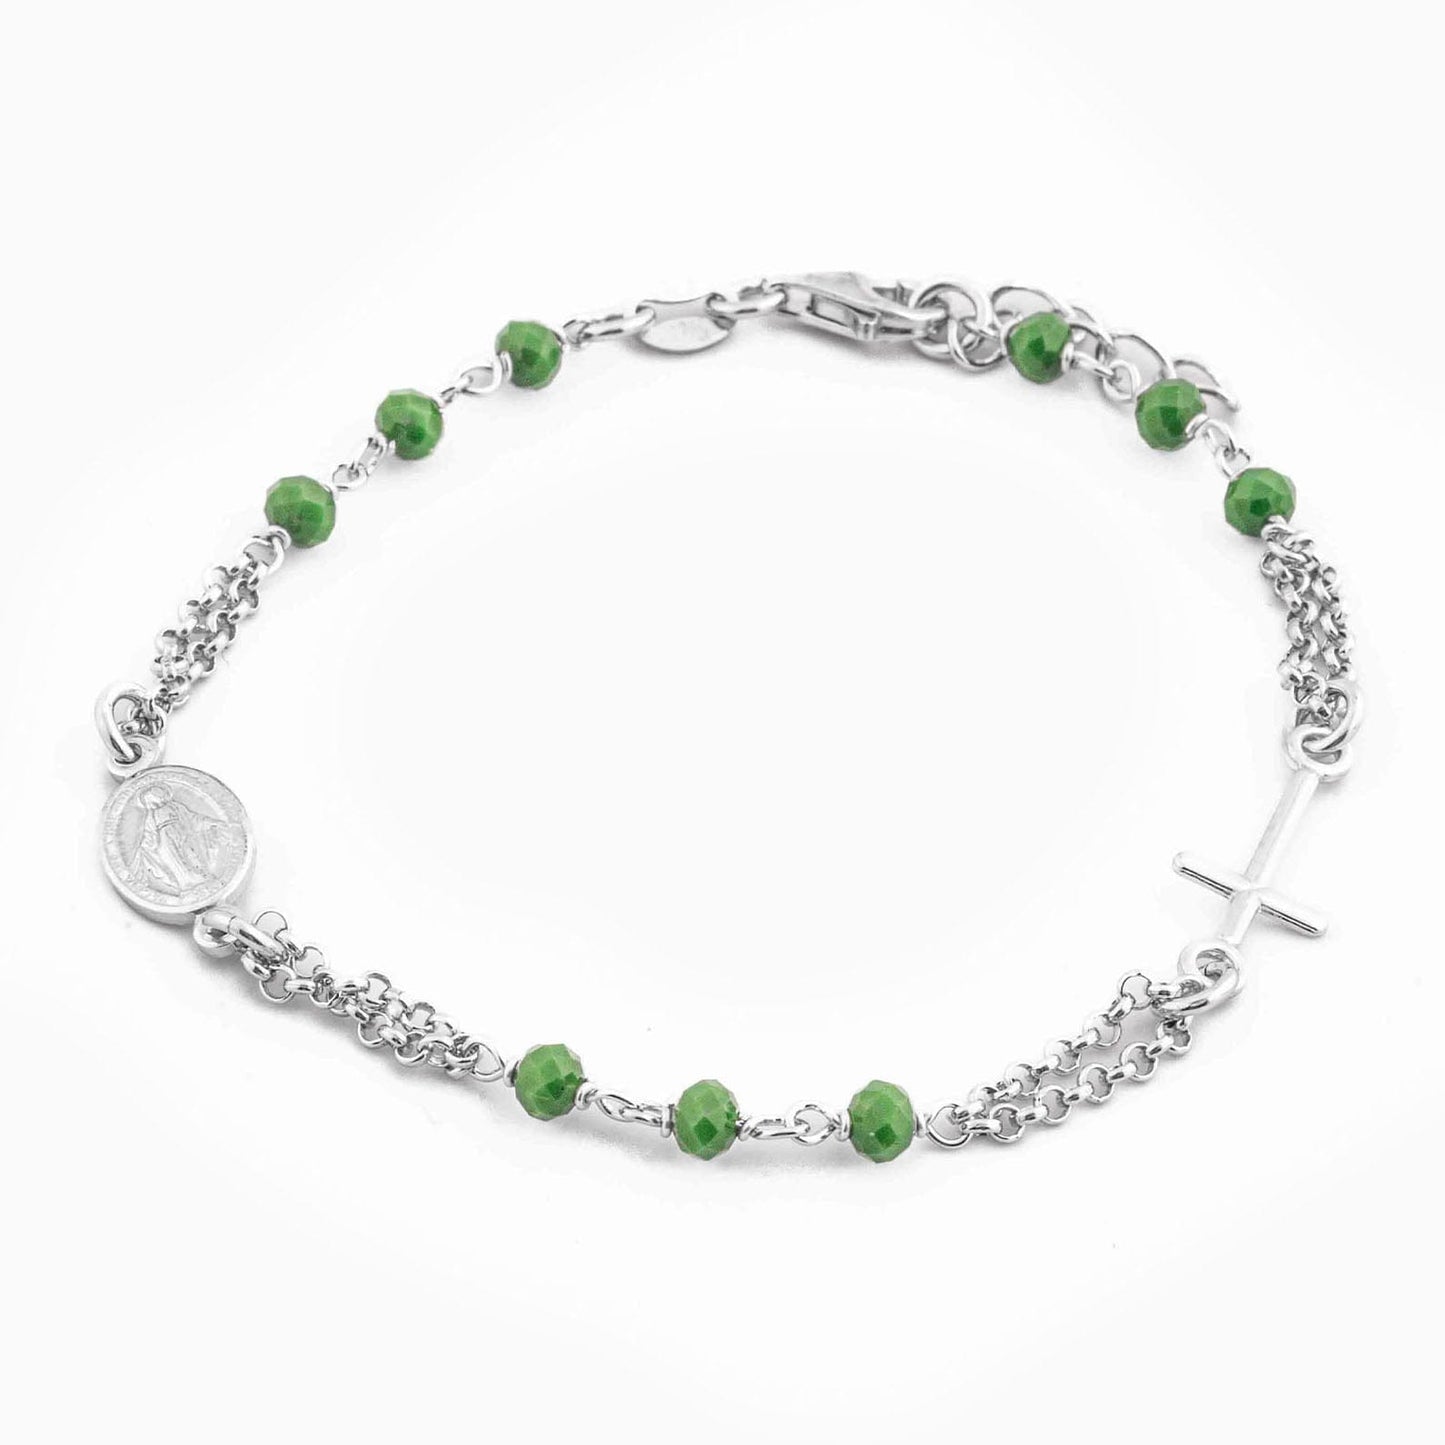 MONDO CATTOLICO Prayer Beads Rhodium / Cm 17.5 (6.9 in) / Cm 3 (1.2 in) STERLING SILVER ROSARY BRACELET DOUBLE CHAIN GREEN FACETED BEADS